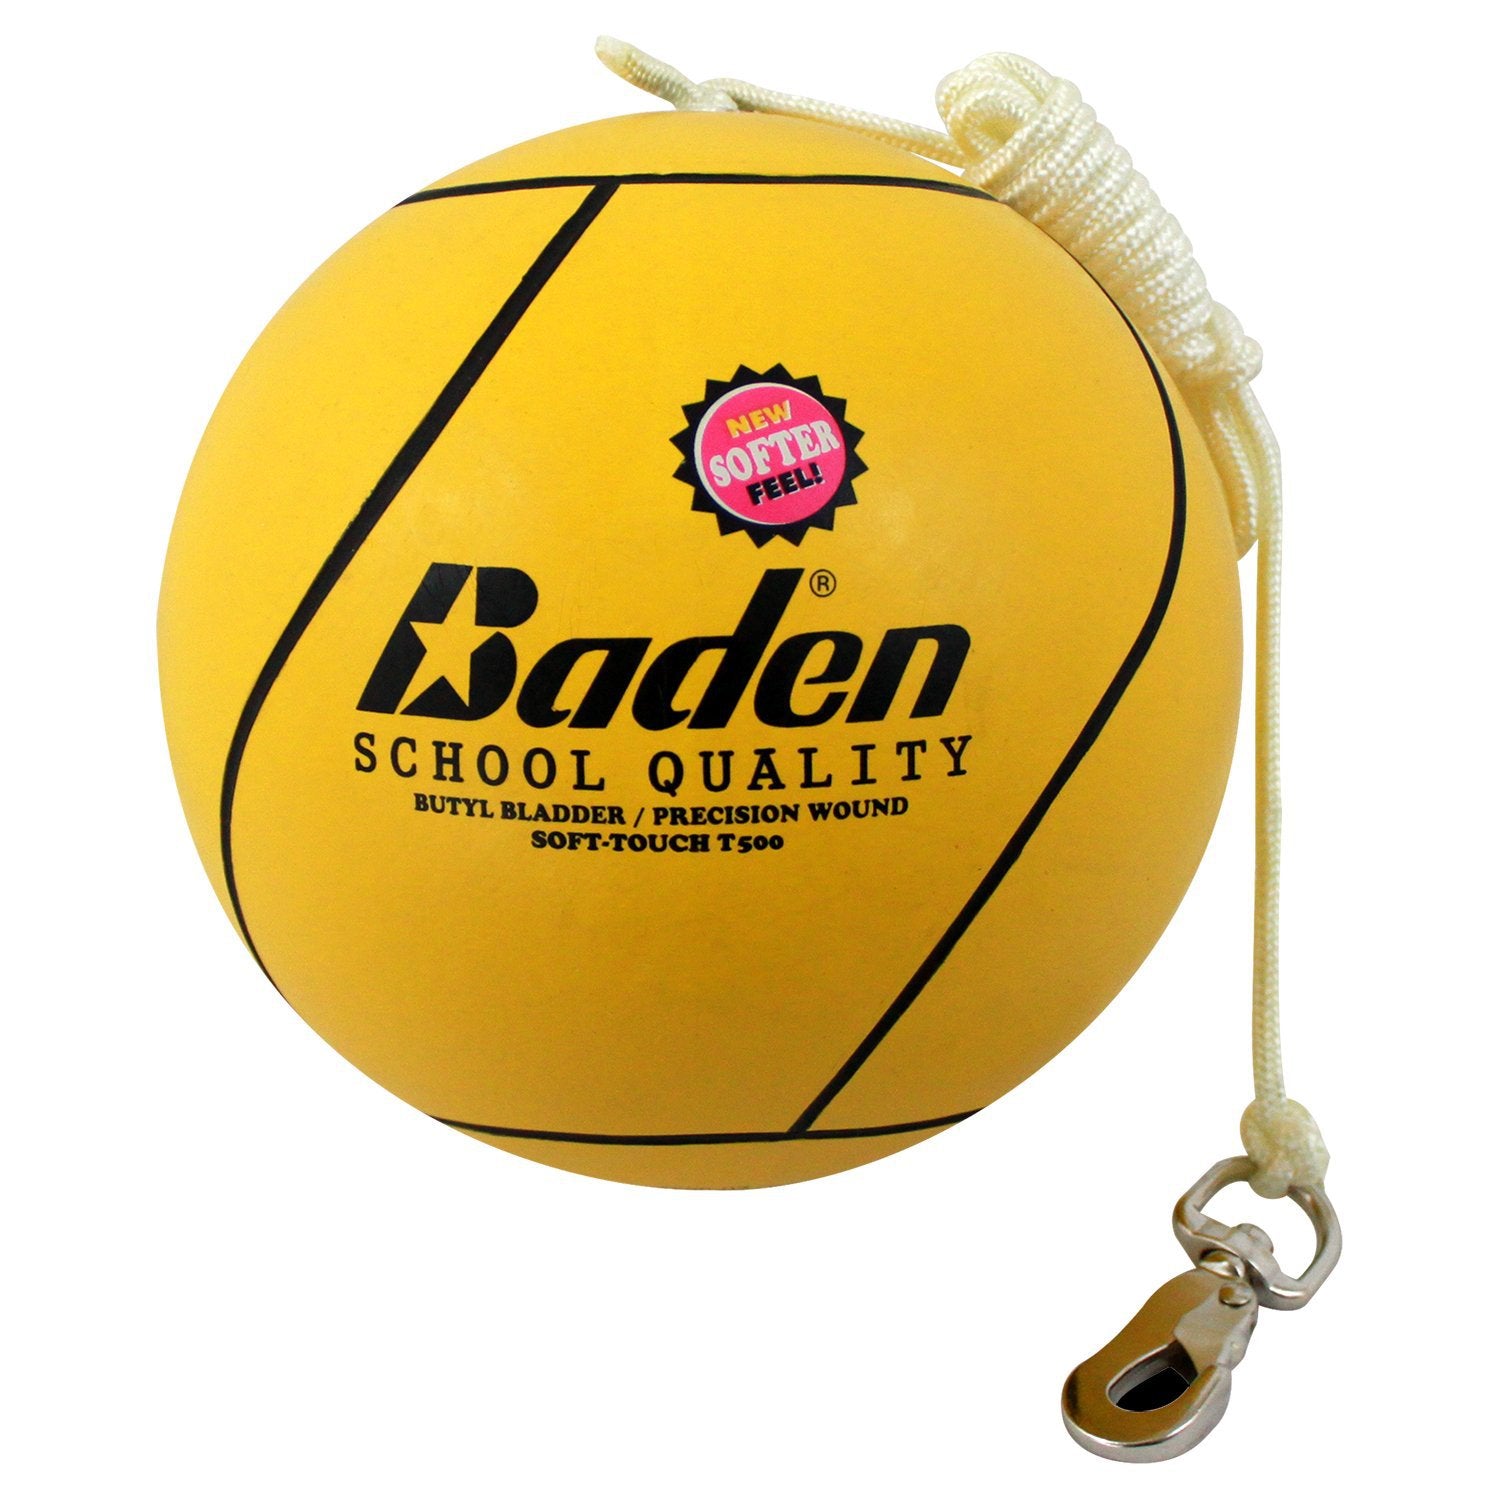 Buy Spot Tetherball with Rope in Canada